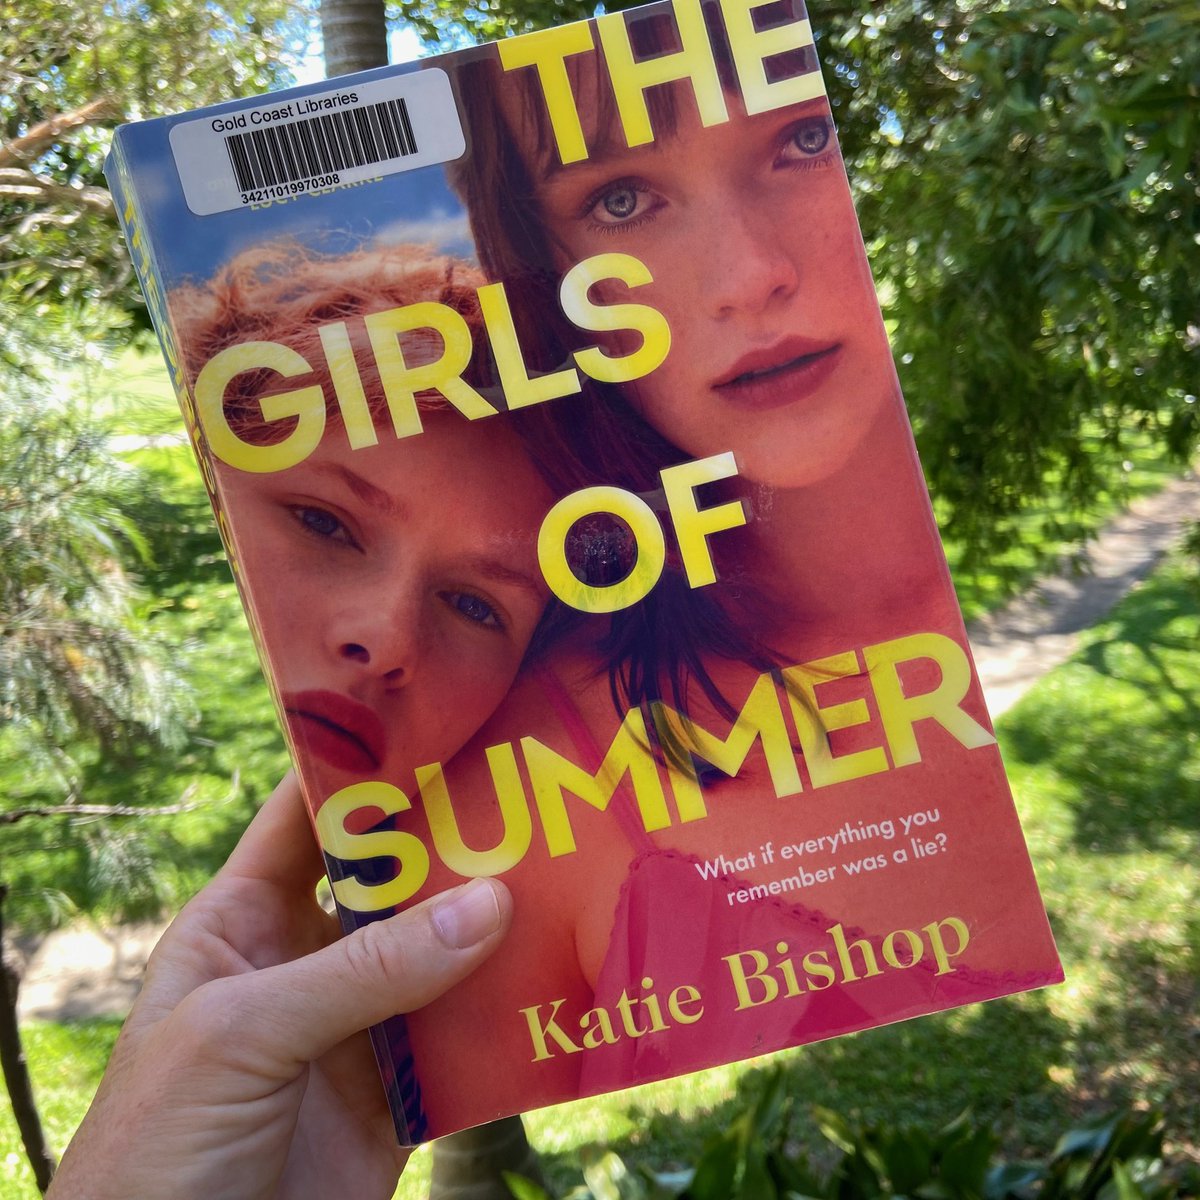 It's the tail end of summer here in Queensland Australia and this was the perfect book to read! #TheGirlsOfSummer by @WhatKatieBWrote is an atmospheric and absorbing sun-drenched dual-timeline mystery set between London and a Greek Island. The summer heat infuses every page!